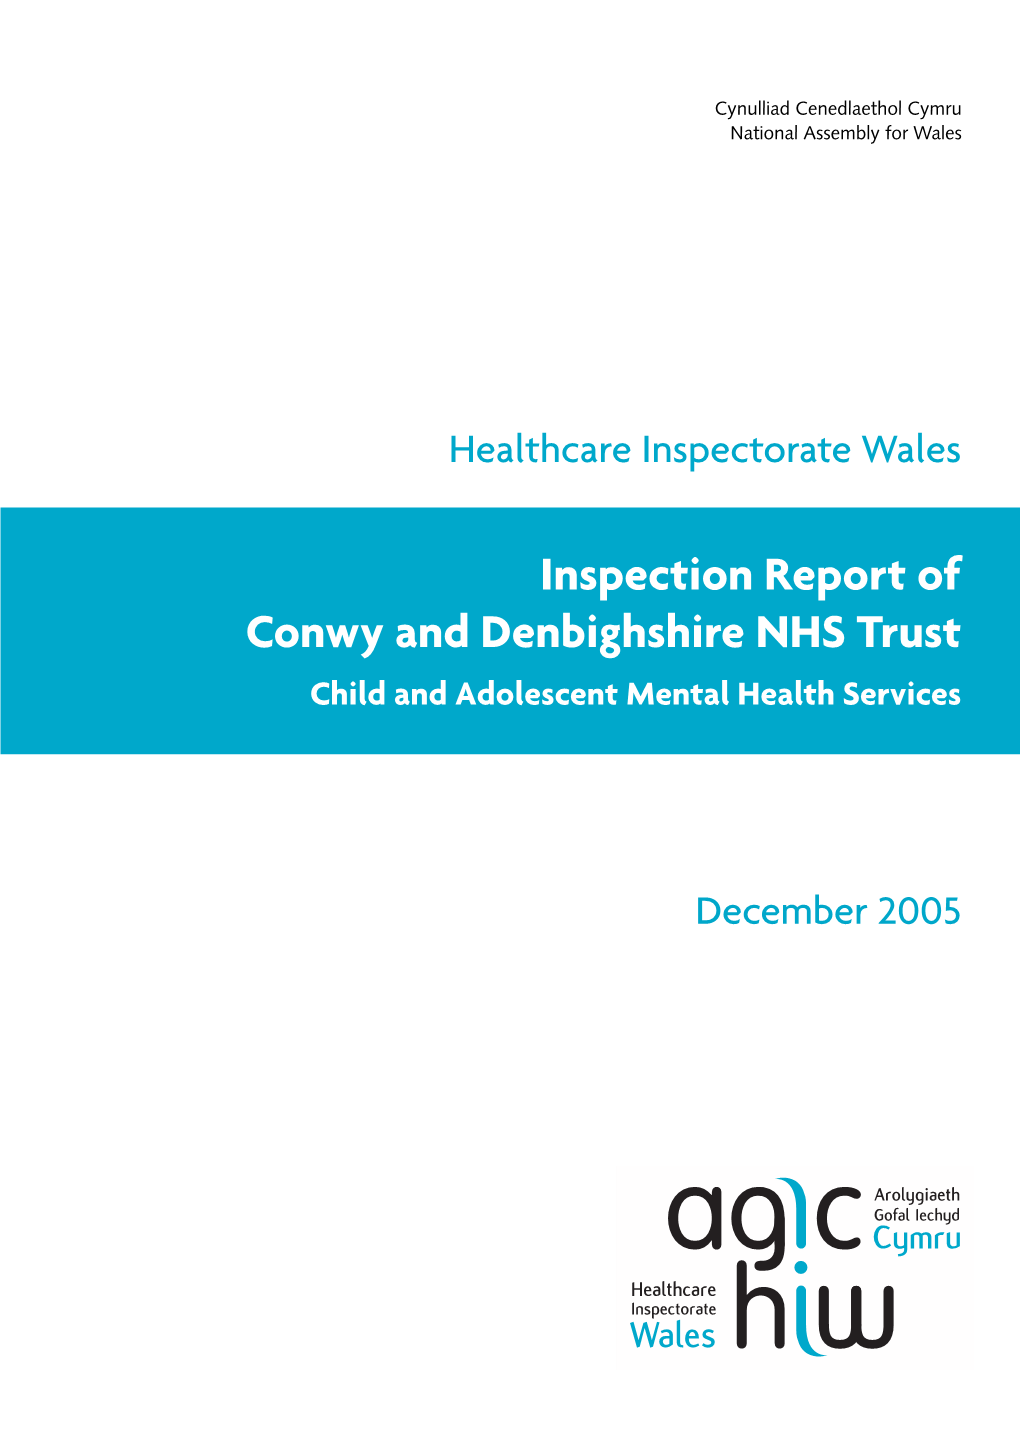 Inspection Report of Conwy and Denbighshire NHS Trust Child and Adolescent Mental Health Services